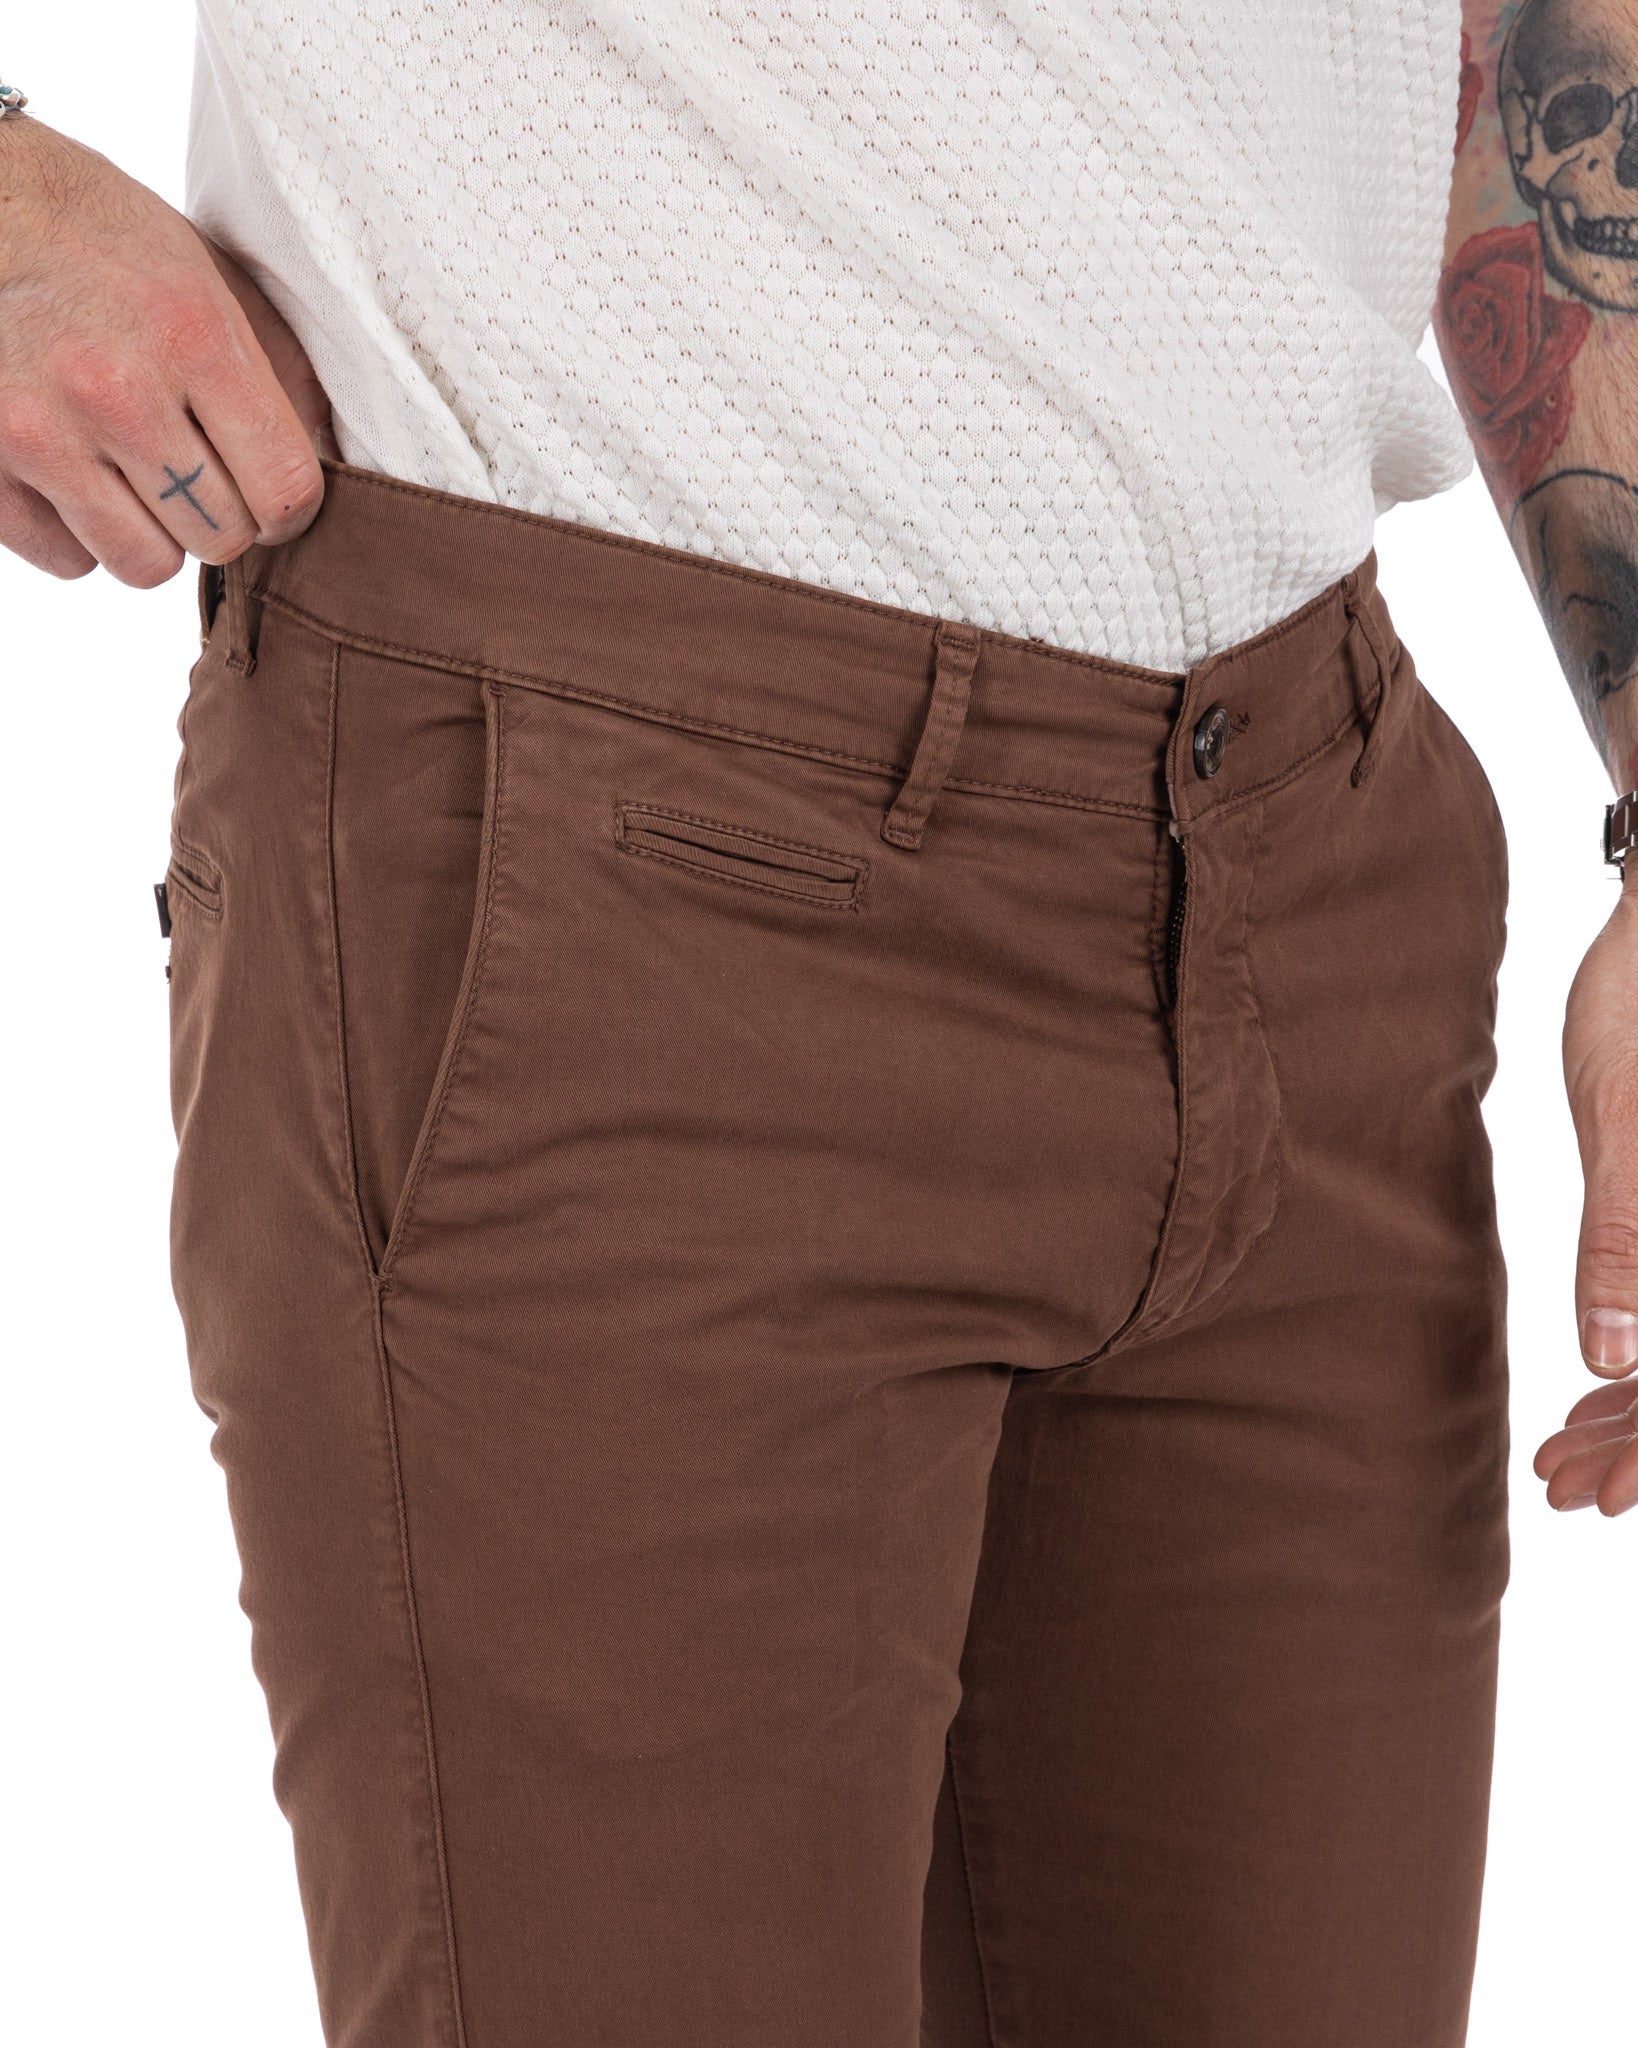 Frank - basic brown trousers